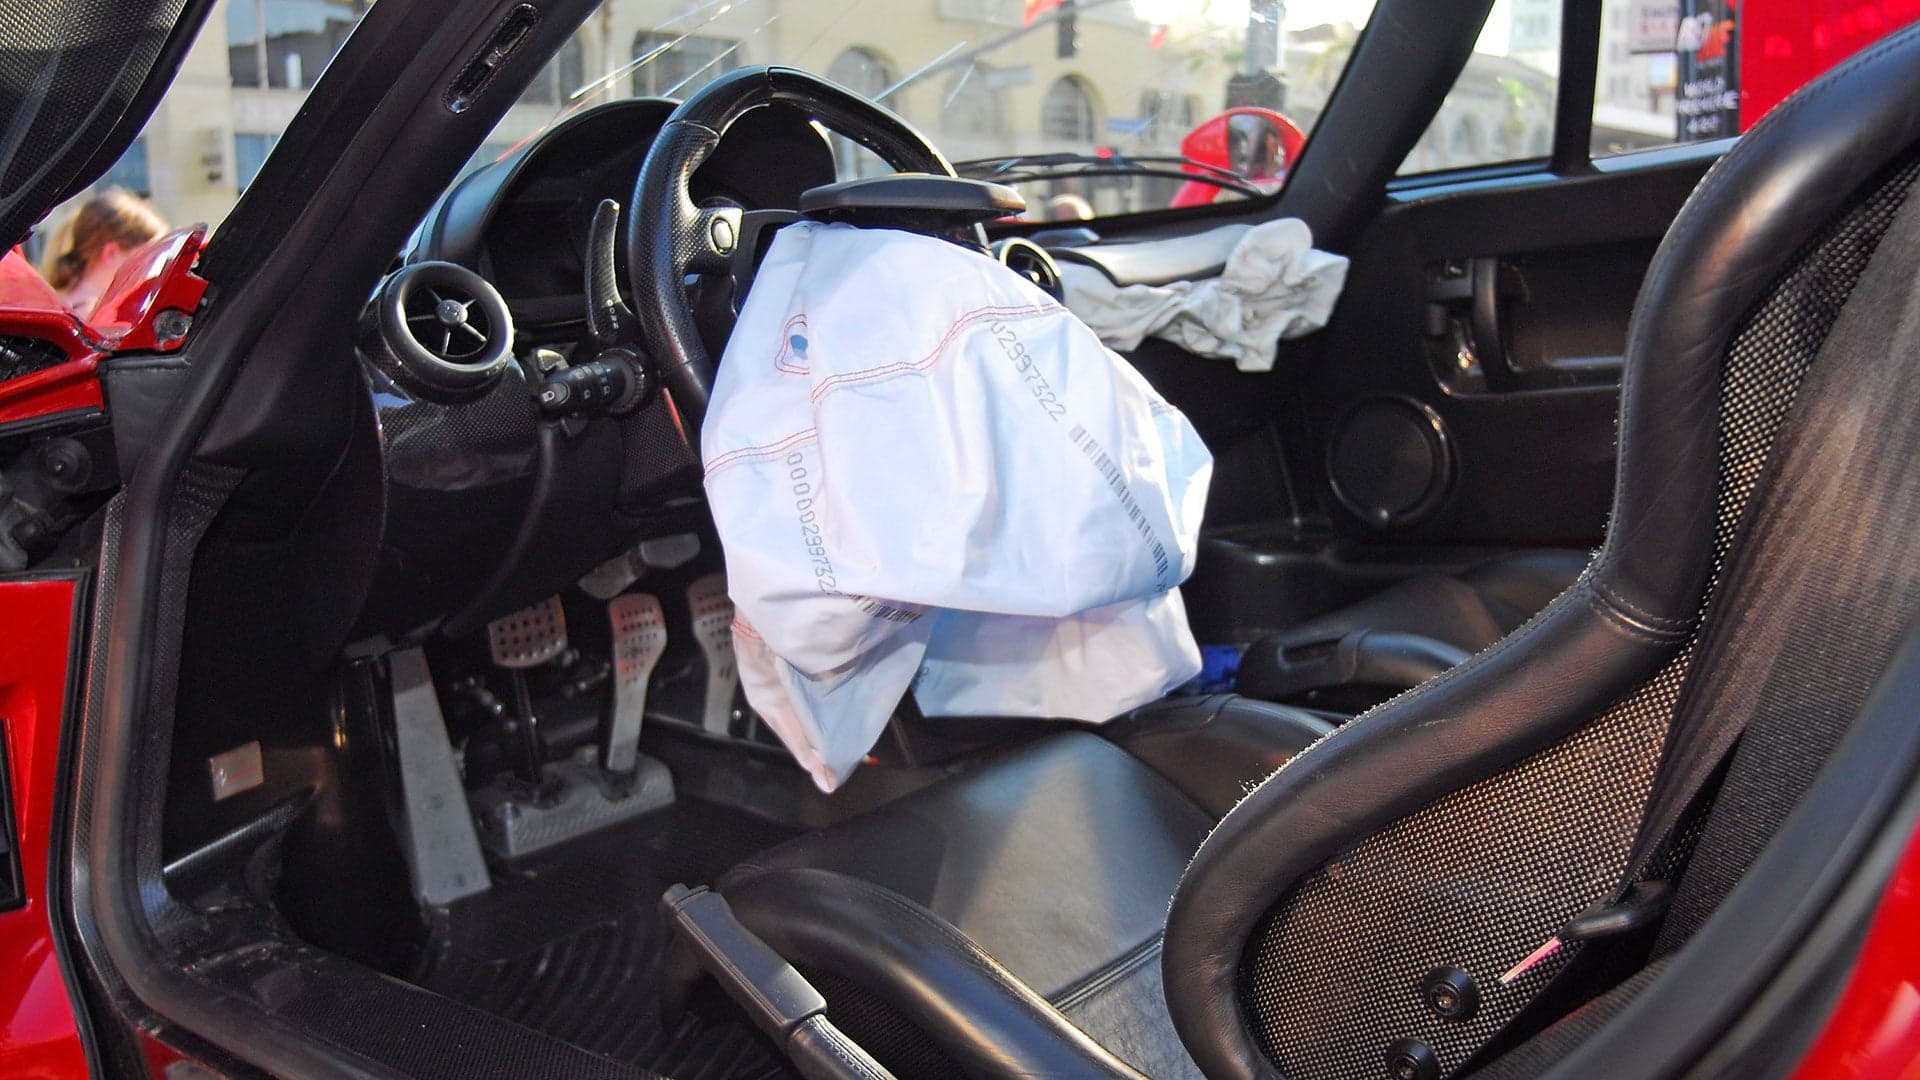 Every New Ferrari On Sale Today Has Faulty Takata Airbags